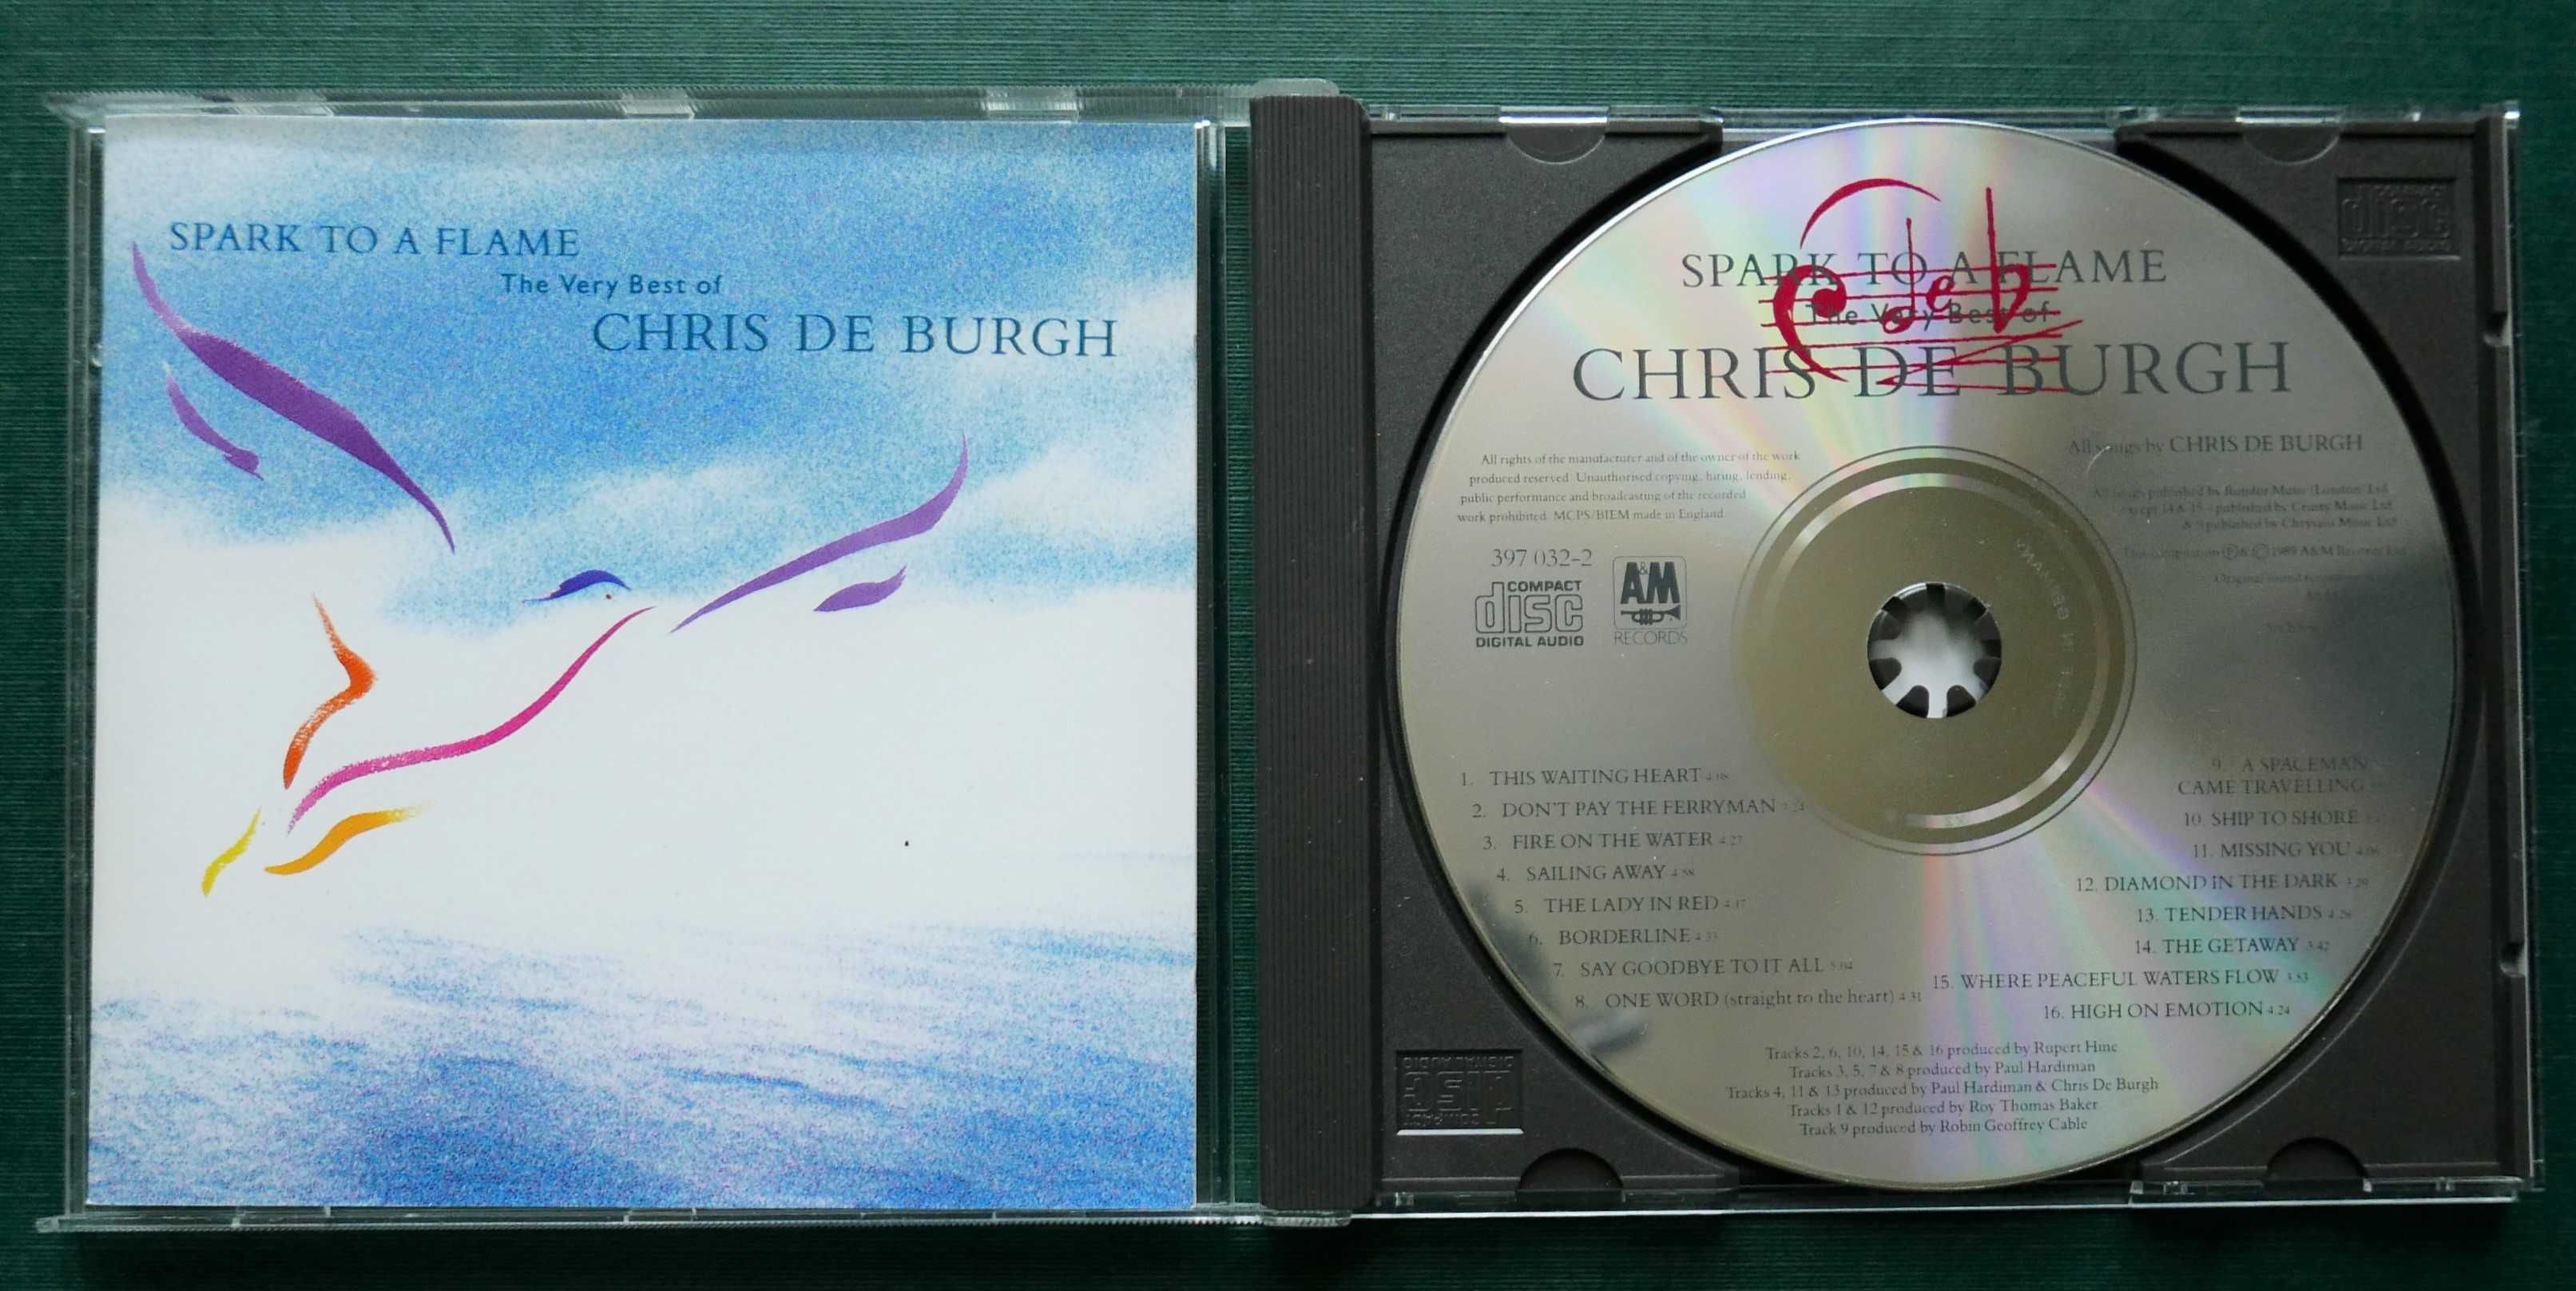 CHRIS DE BURGE - Spark to Flame/The Very Best of (plyta CD)